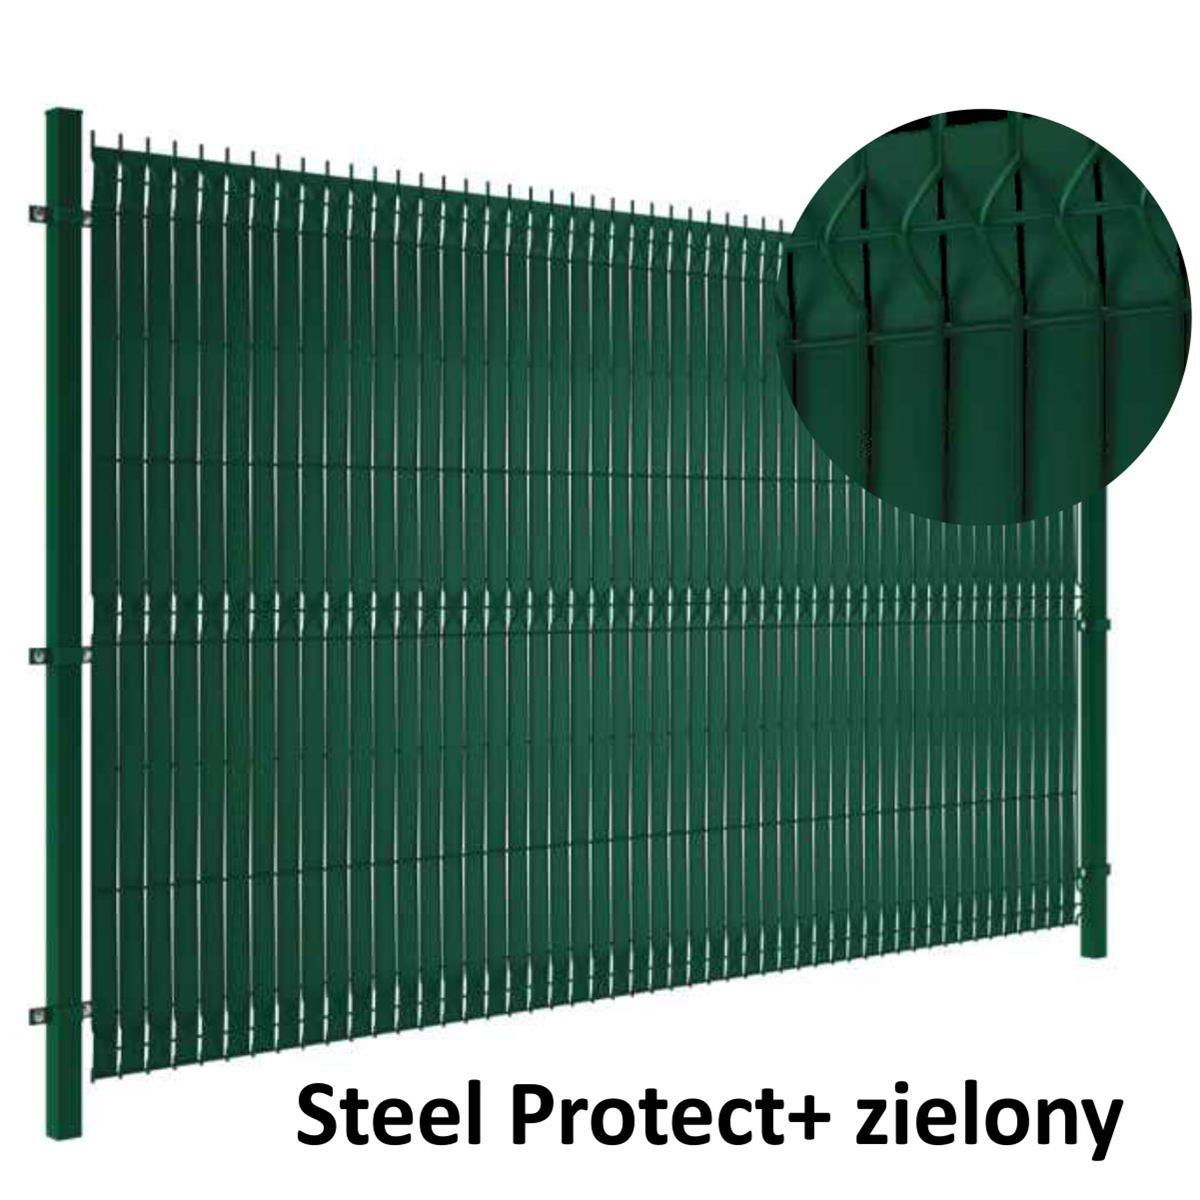 Steel-Protect-Zielony-Panel-System-Group